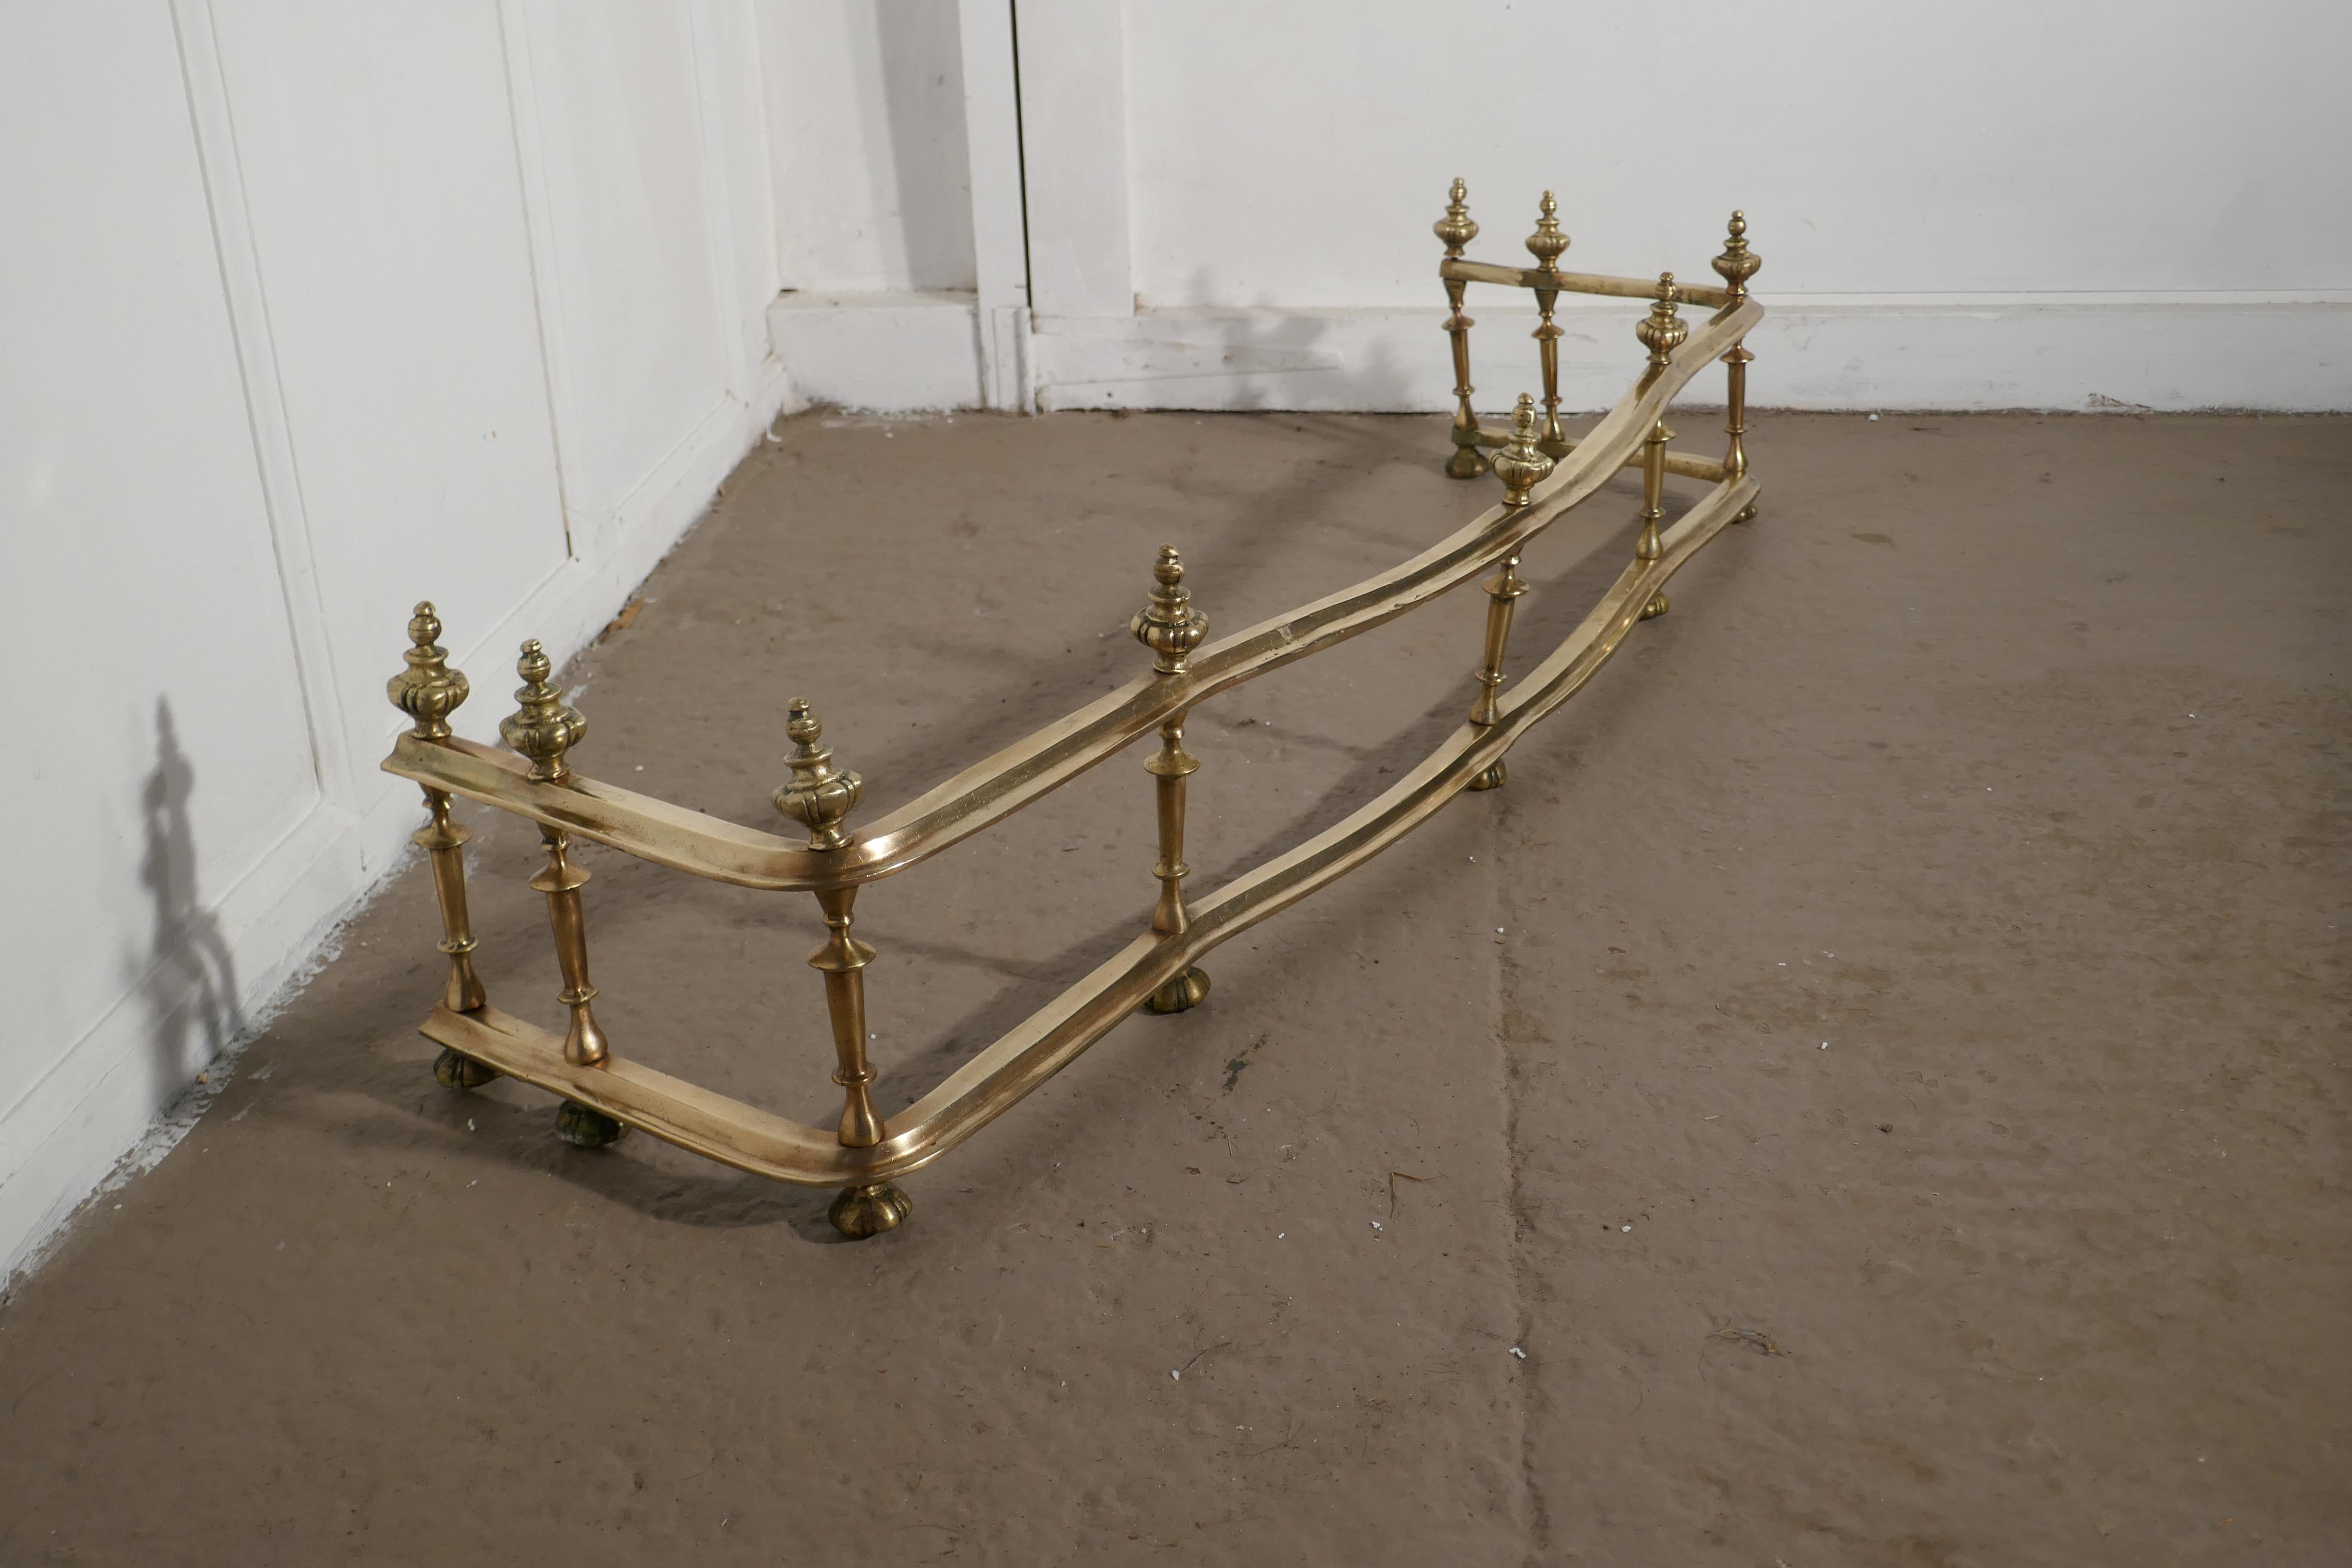 Large best quality 19th century heavy brass fender

This is a superb quality brass fender it has a deep with handmade spindles joining the 2 solid brass rails

The fender has an unusual waved shape
The fender is in good vintage condition it is